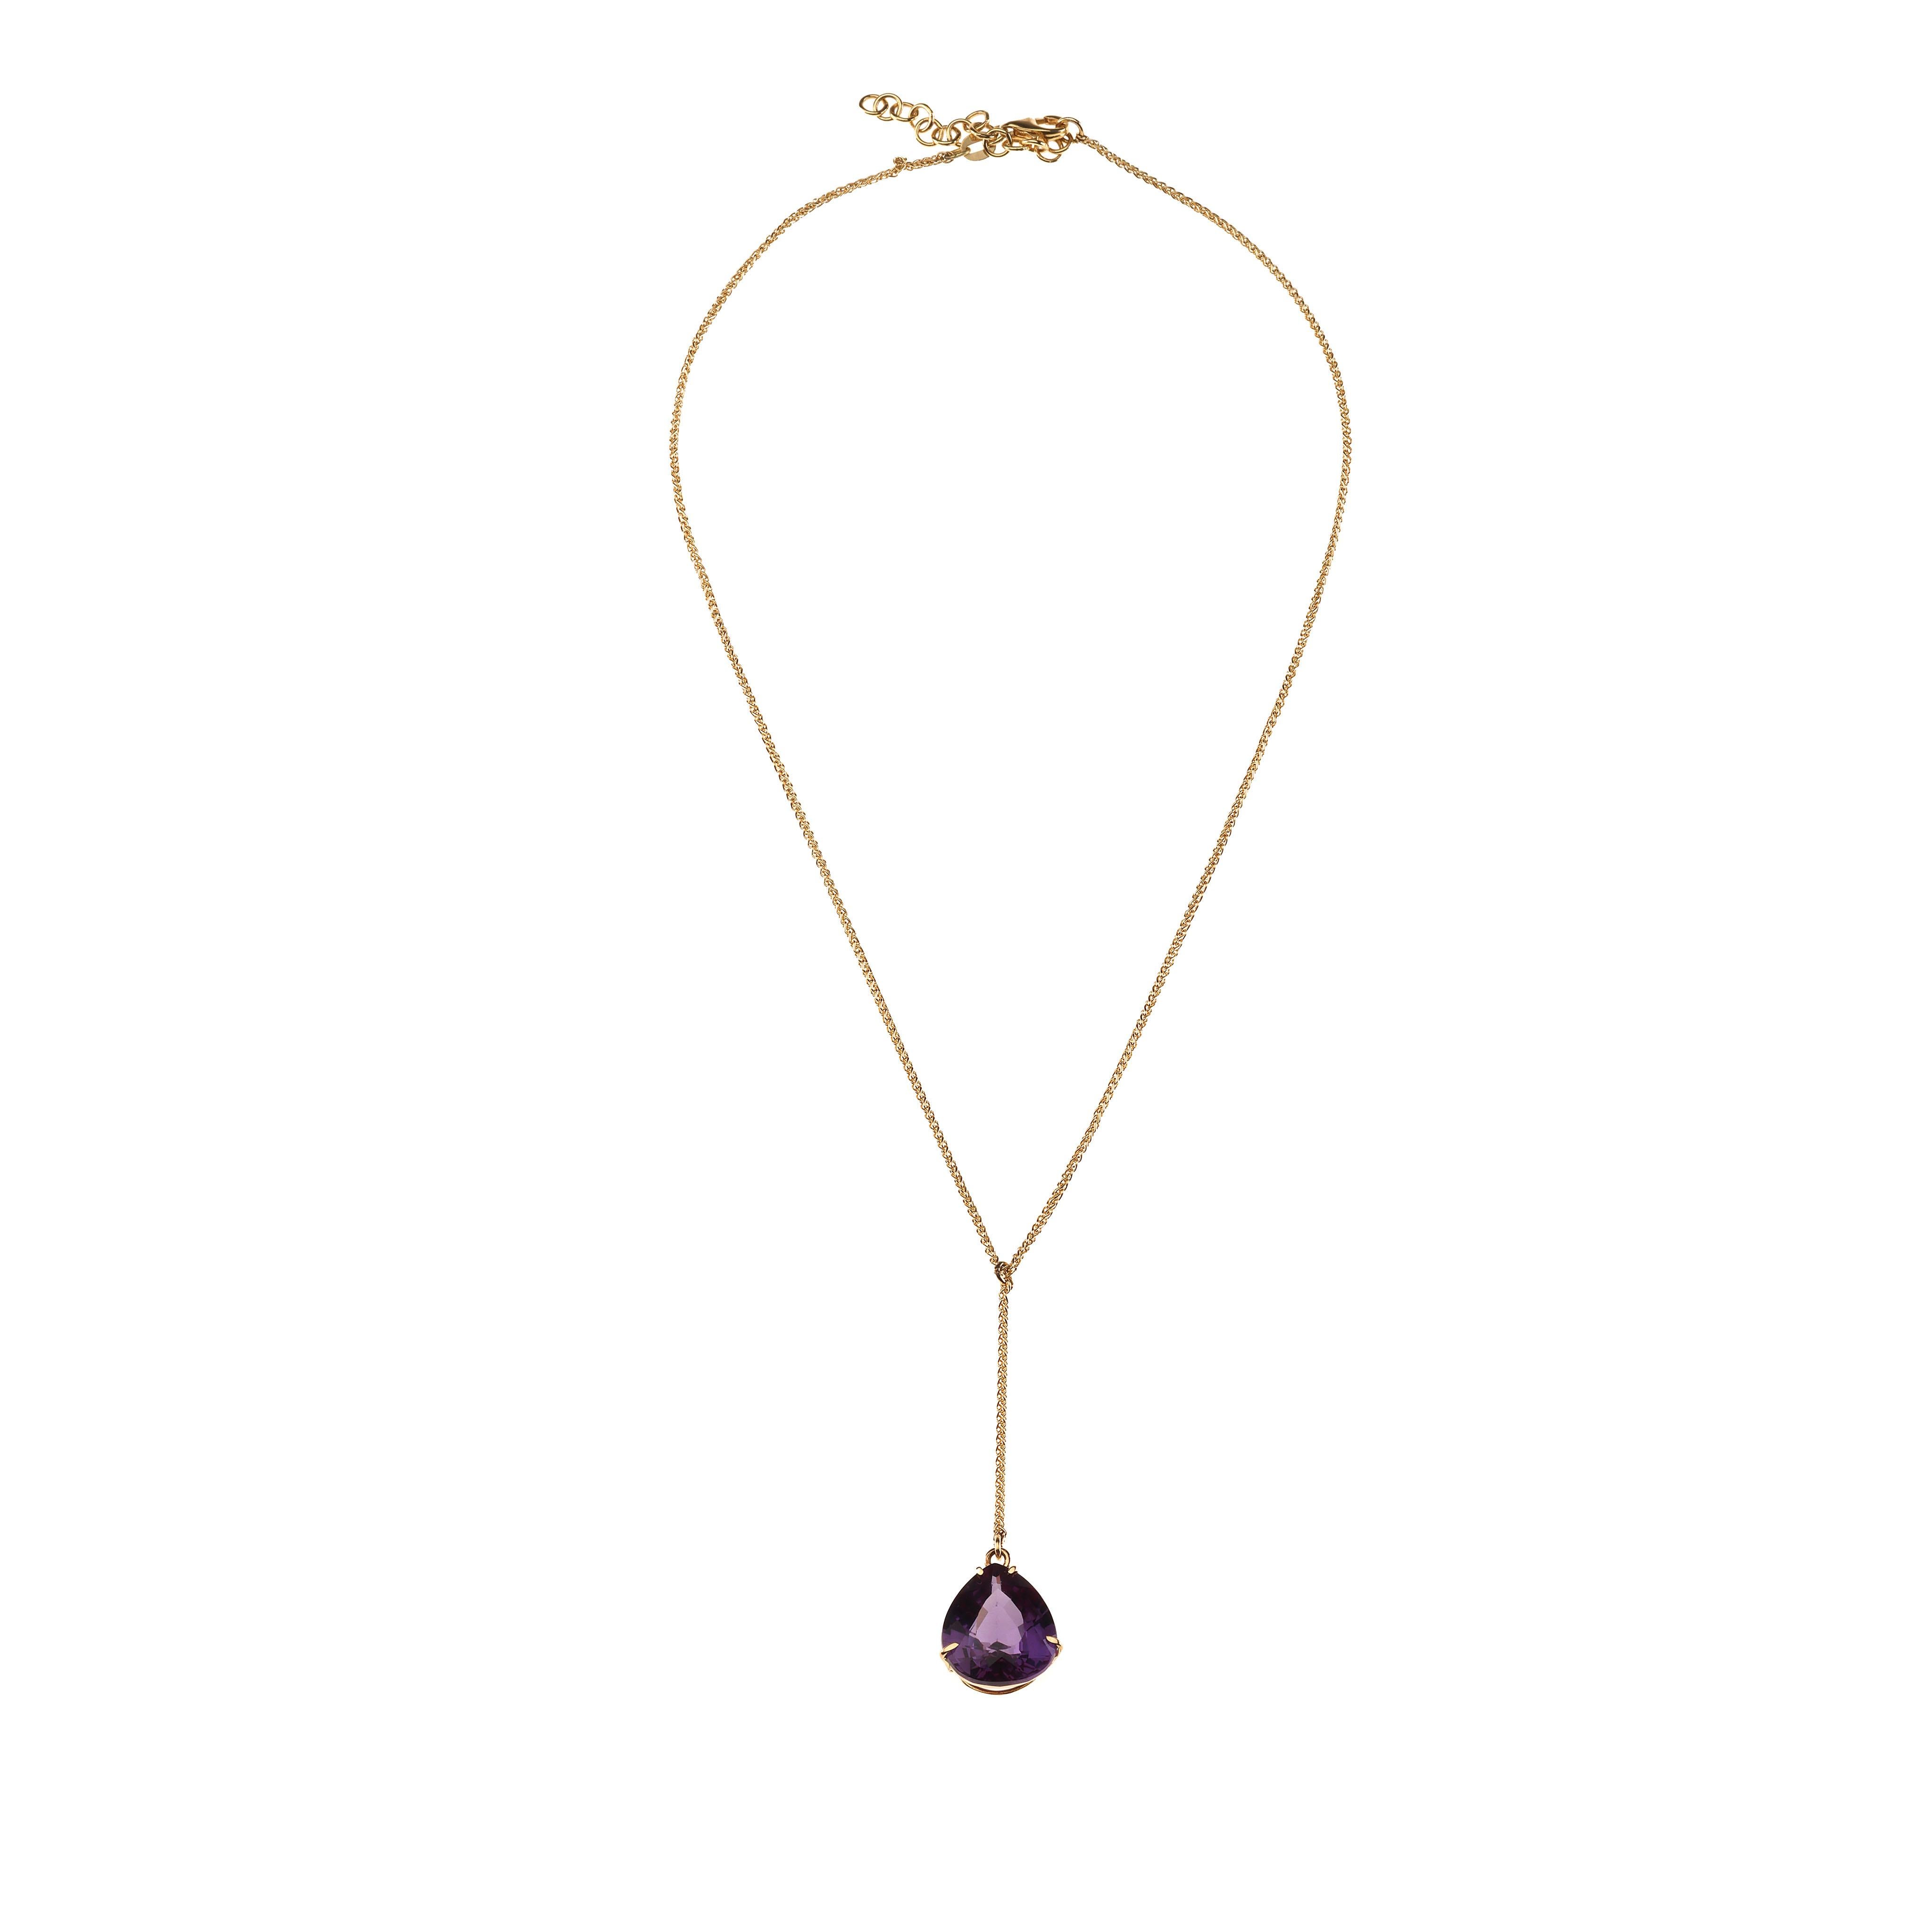 Amethyst 18k gold necklace gr 10,40 all made by hand.
All Giulia Colussi jewelry is new and has never been previously owned or worn. Each item will arrive at your door beautifully gift wrapped in our boxes, put inside an elegant pouch or jewel